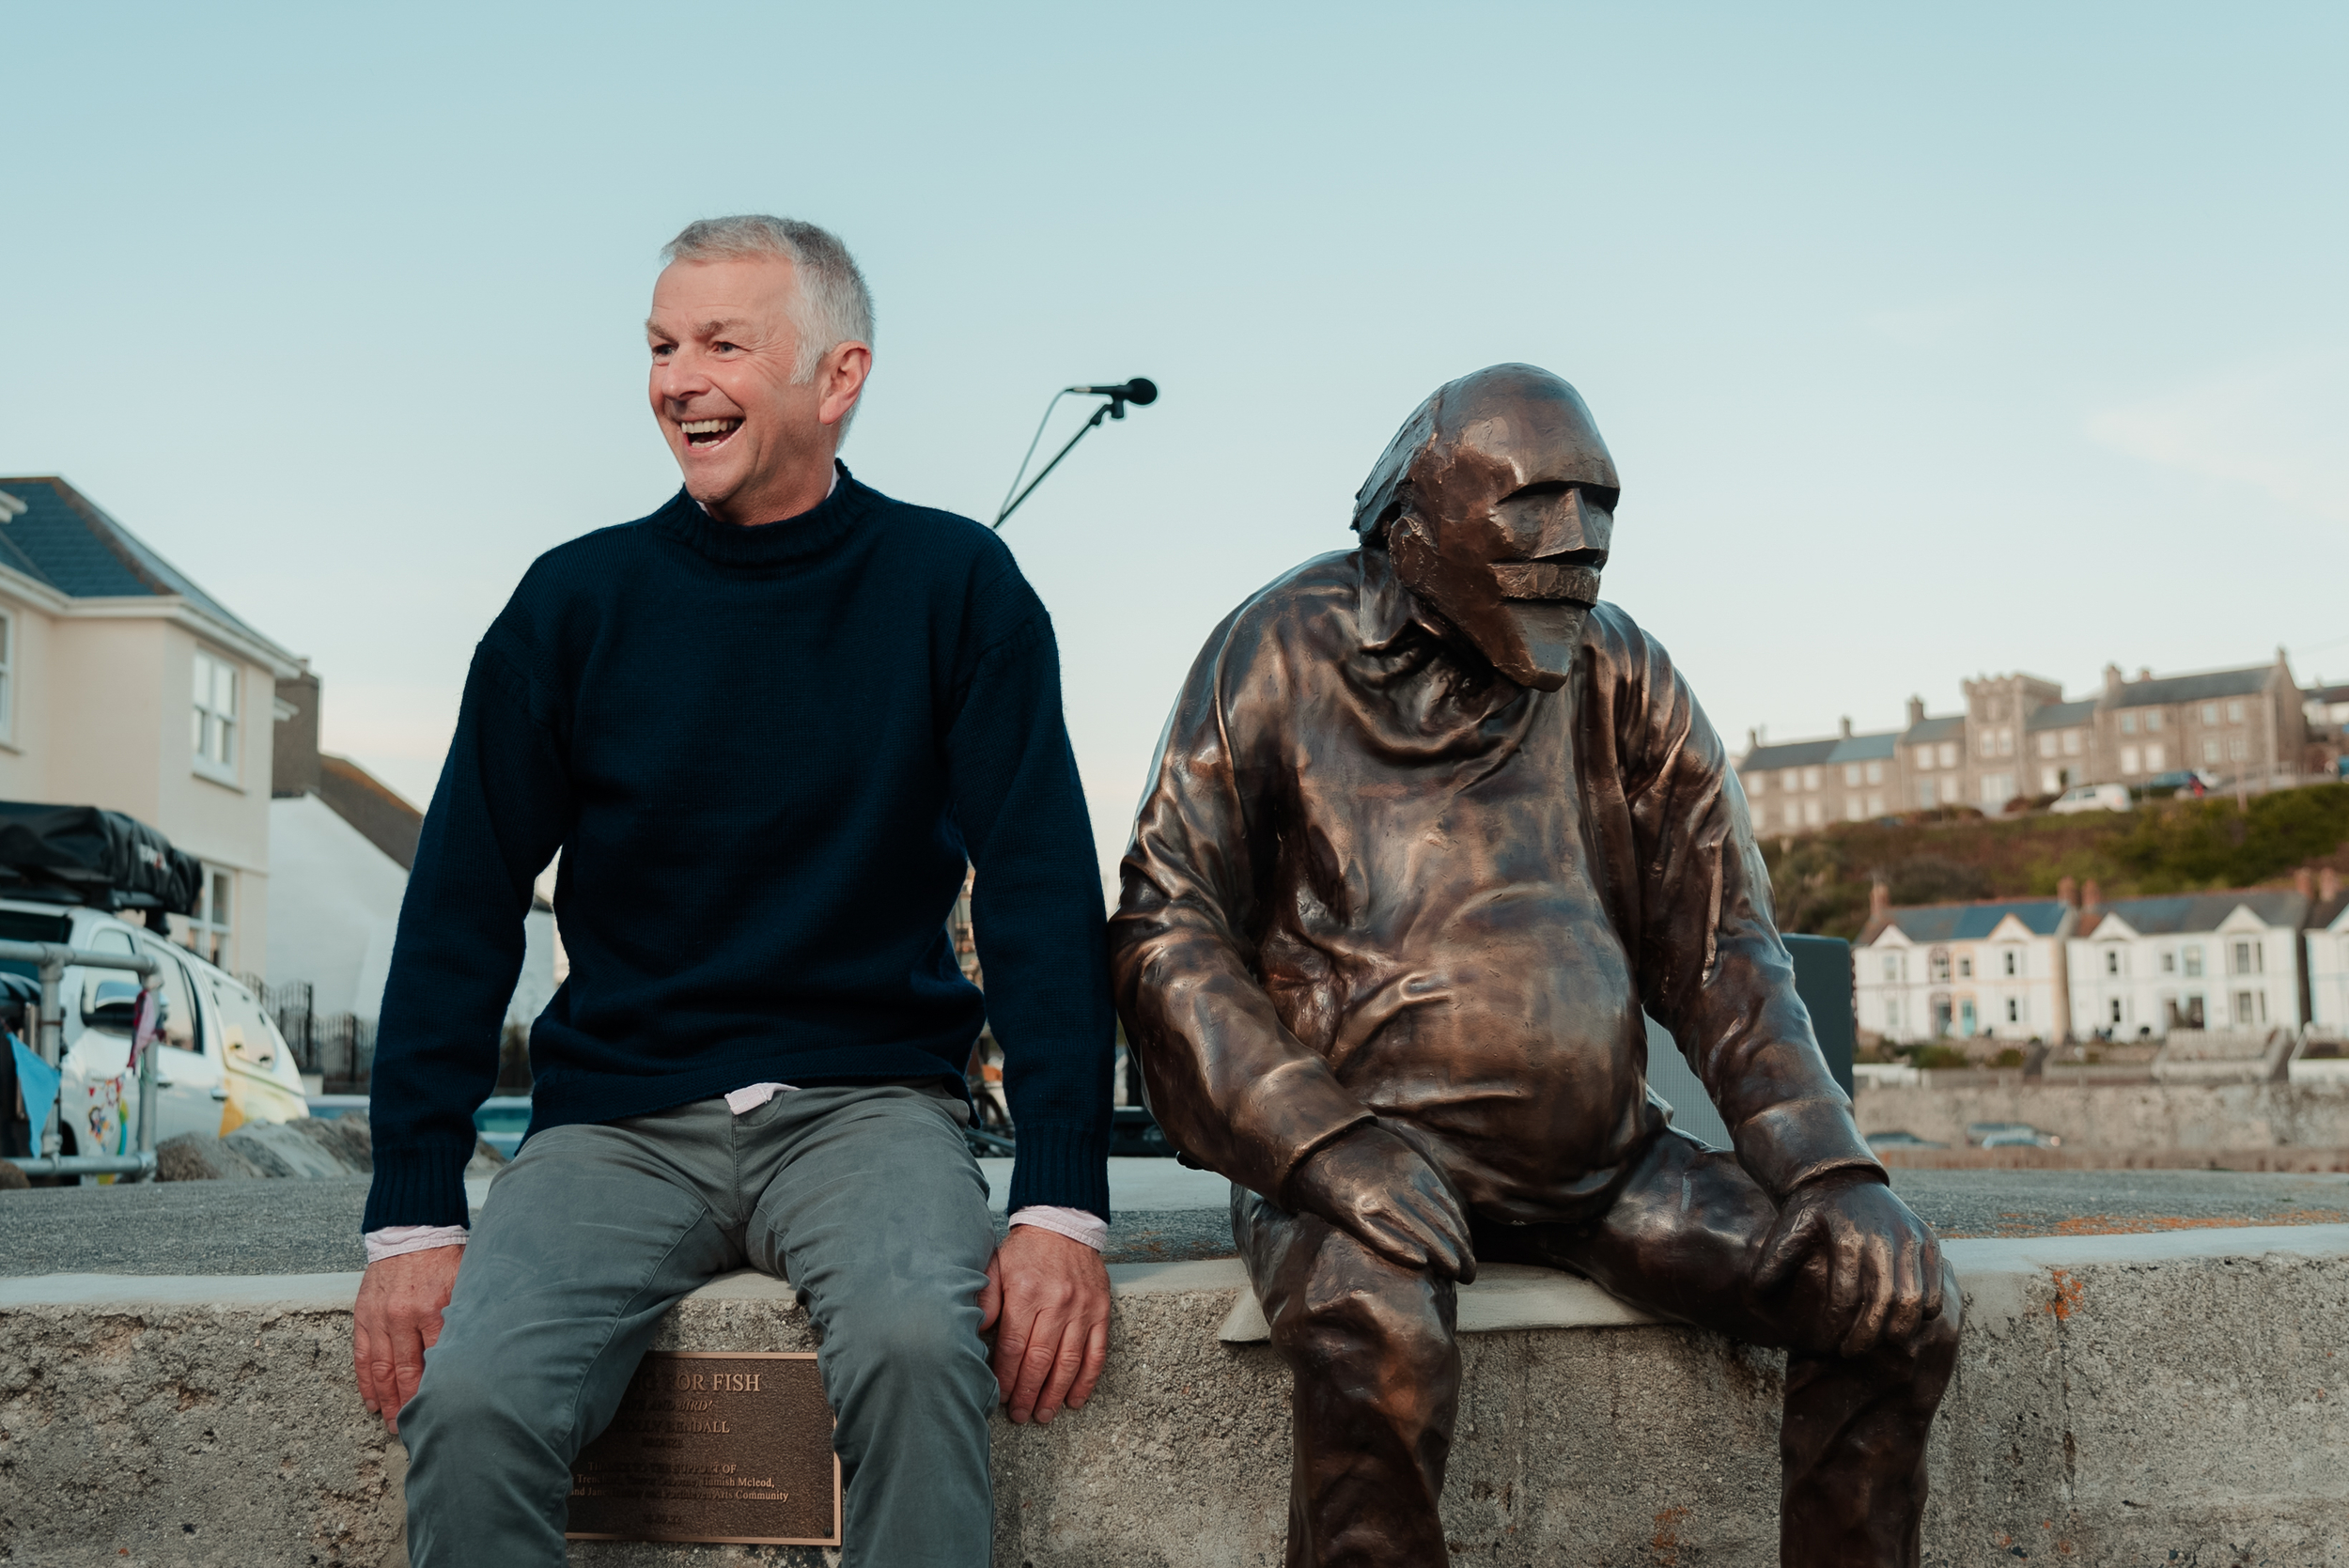 Jeremy smiles while he sits next to a bronze sculpture of a sitting man looking out into the distance.